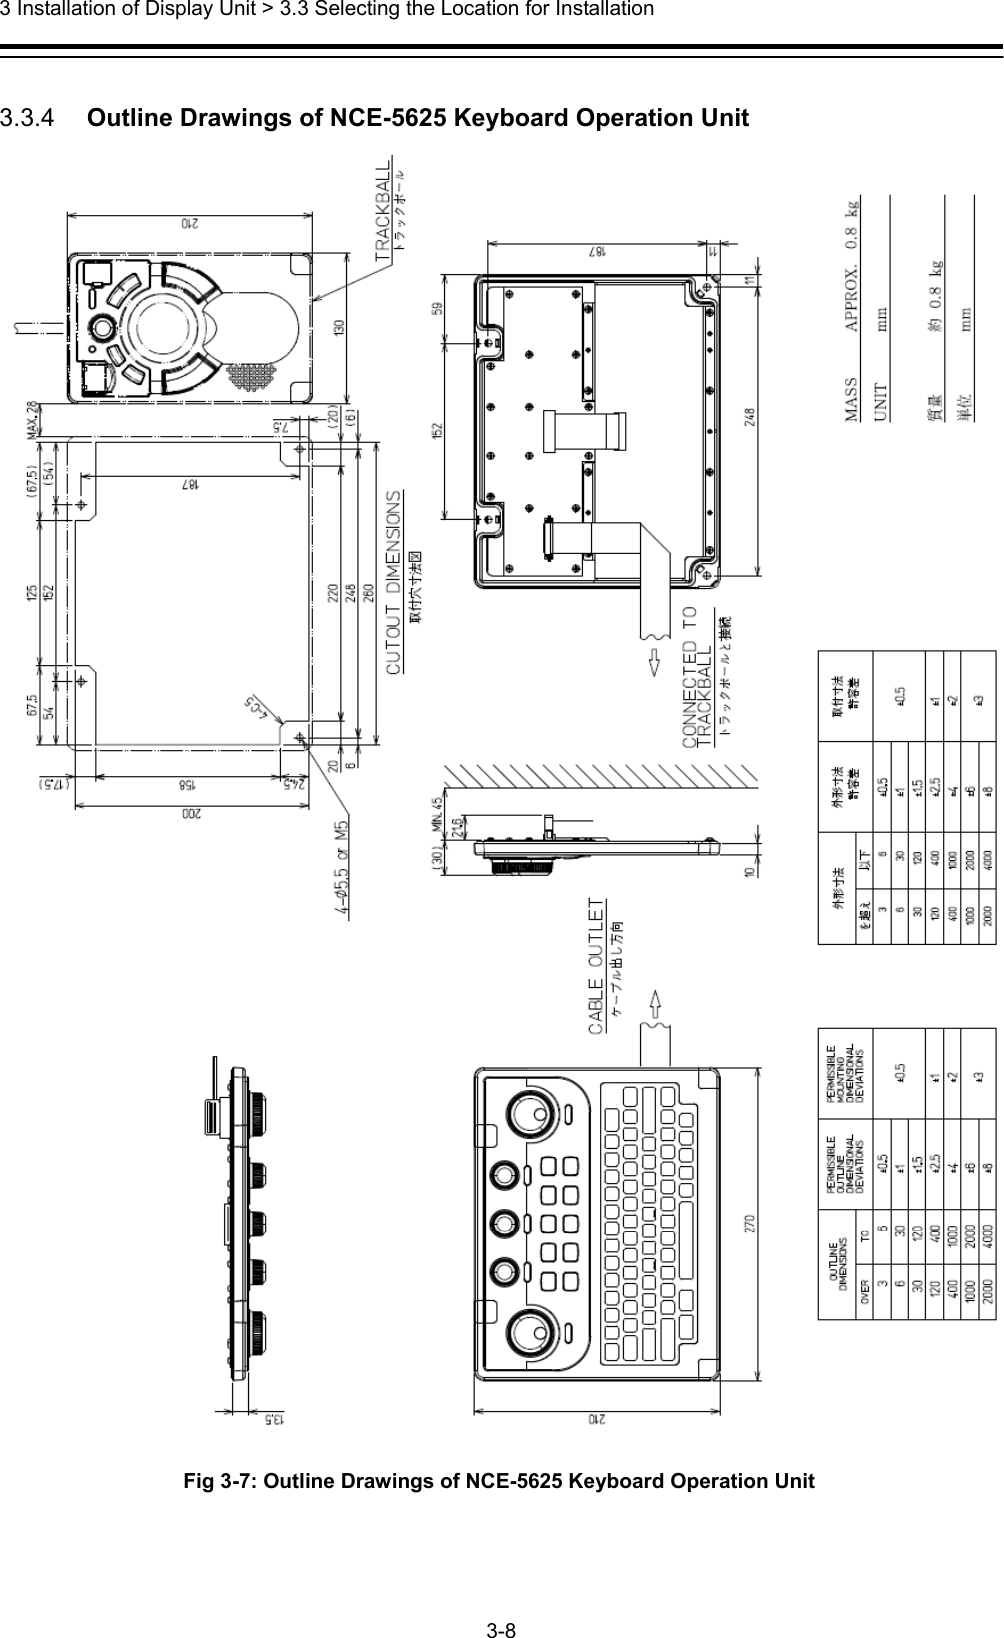  3 Installation of Display Unit &gt; 3.3 Selecting the Location for Installation 3-8   3.3.4   Outline Drawings of NCE-5625 Keyboard Operation Unit  Fig 3-7: Outline Drawings of NCE-5625 Keyboard Operation Unit 